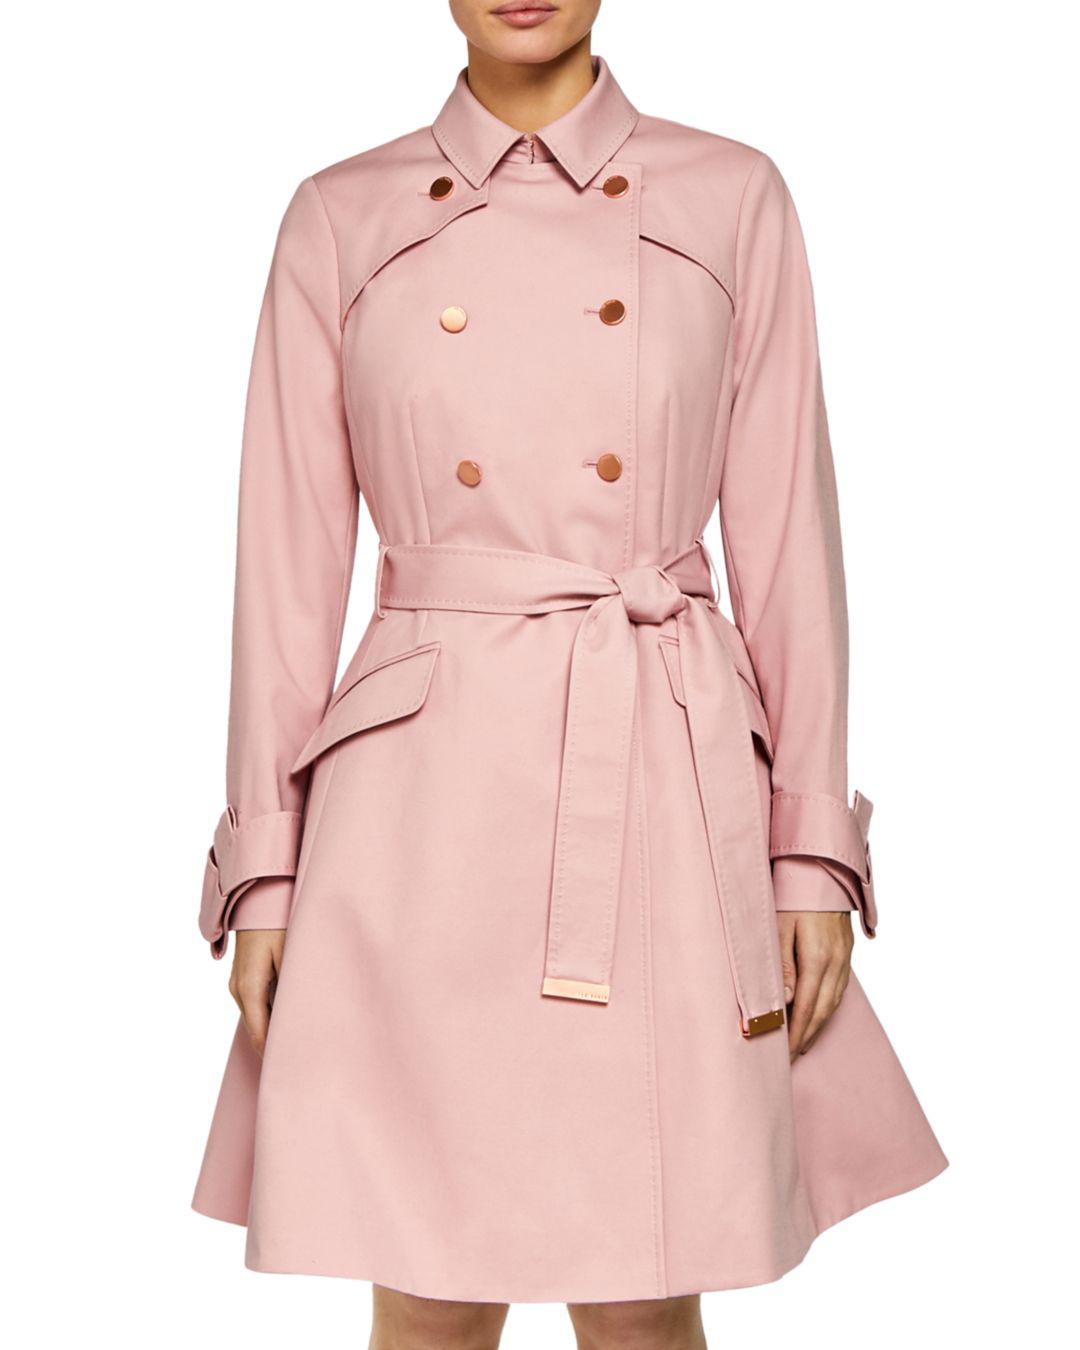 Ted Baker Marrian Flared Trench Coat in Dusky Pink (Pink) - Lyst